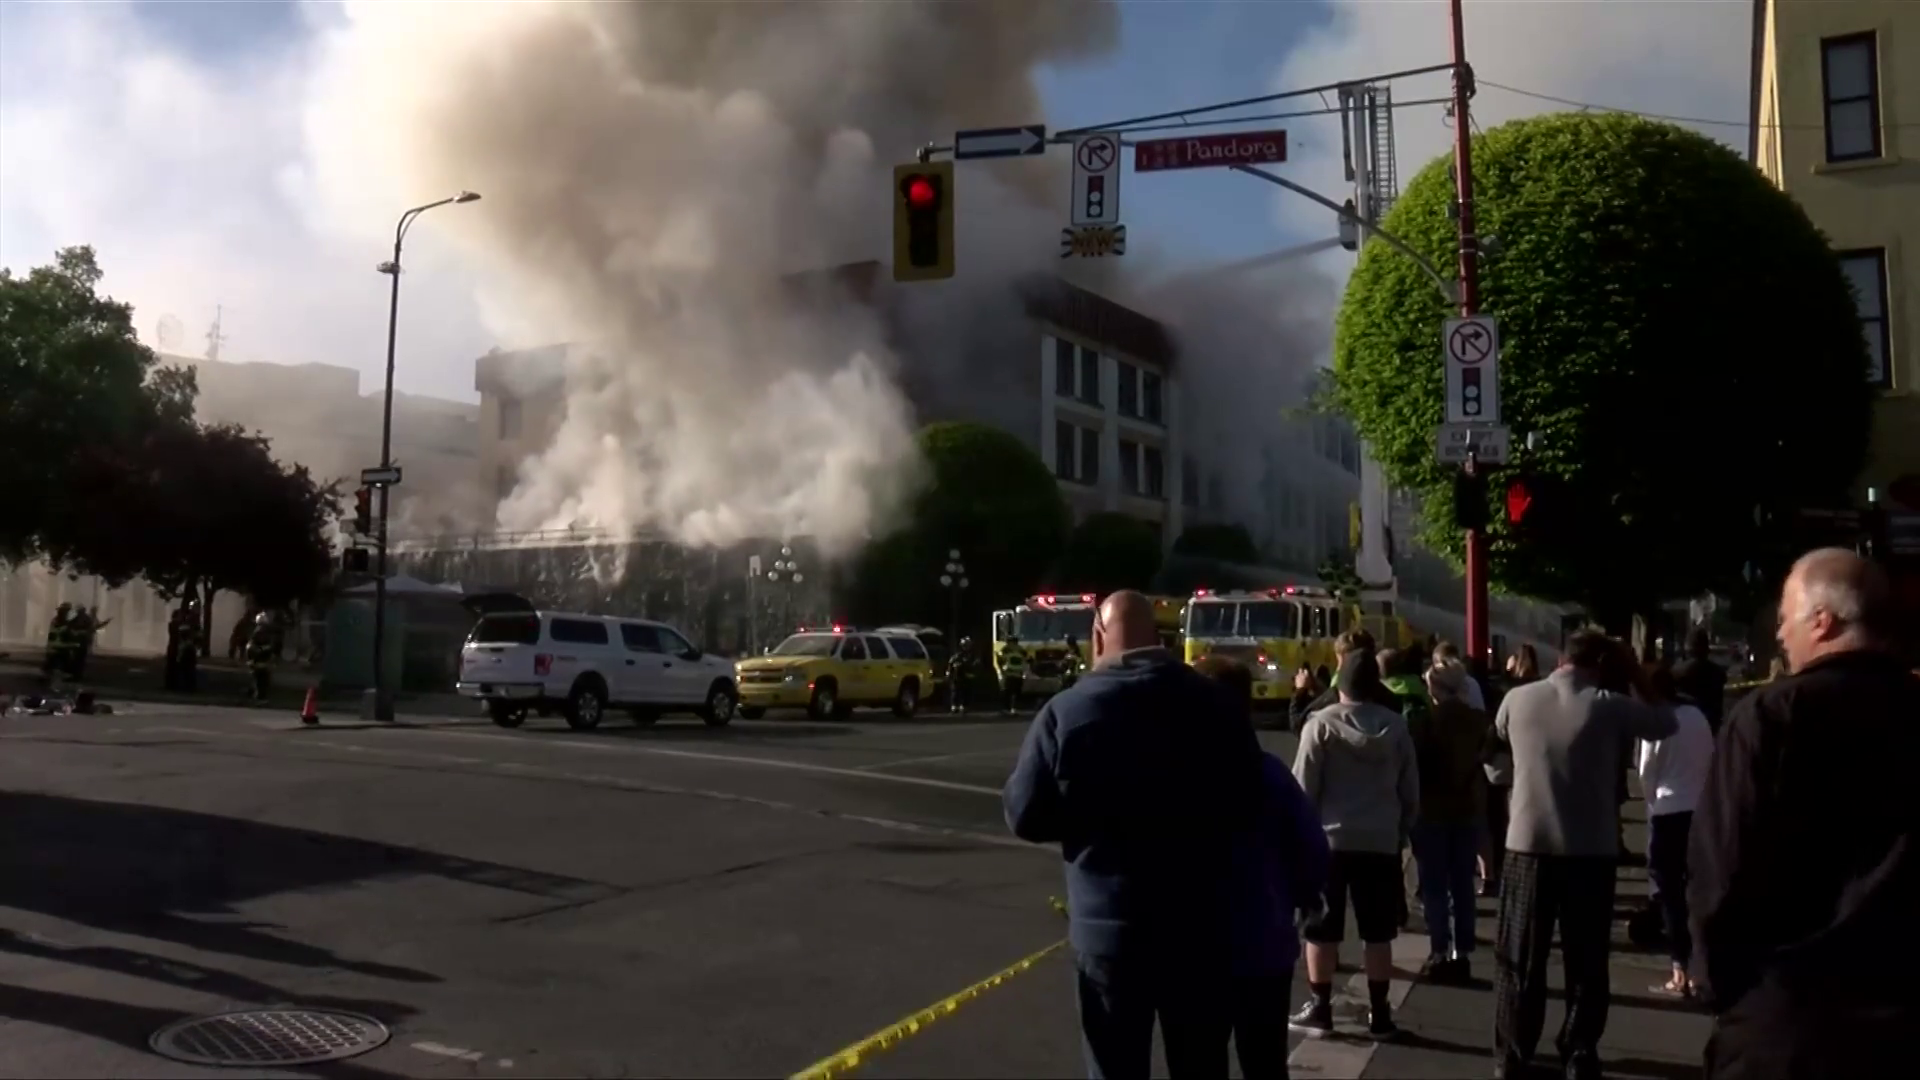 Five years since Victoria's Plaza Hotel went up in flames